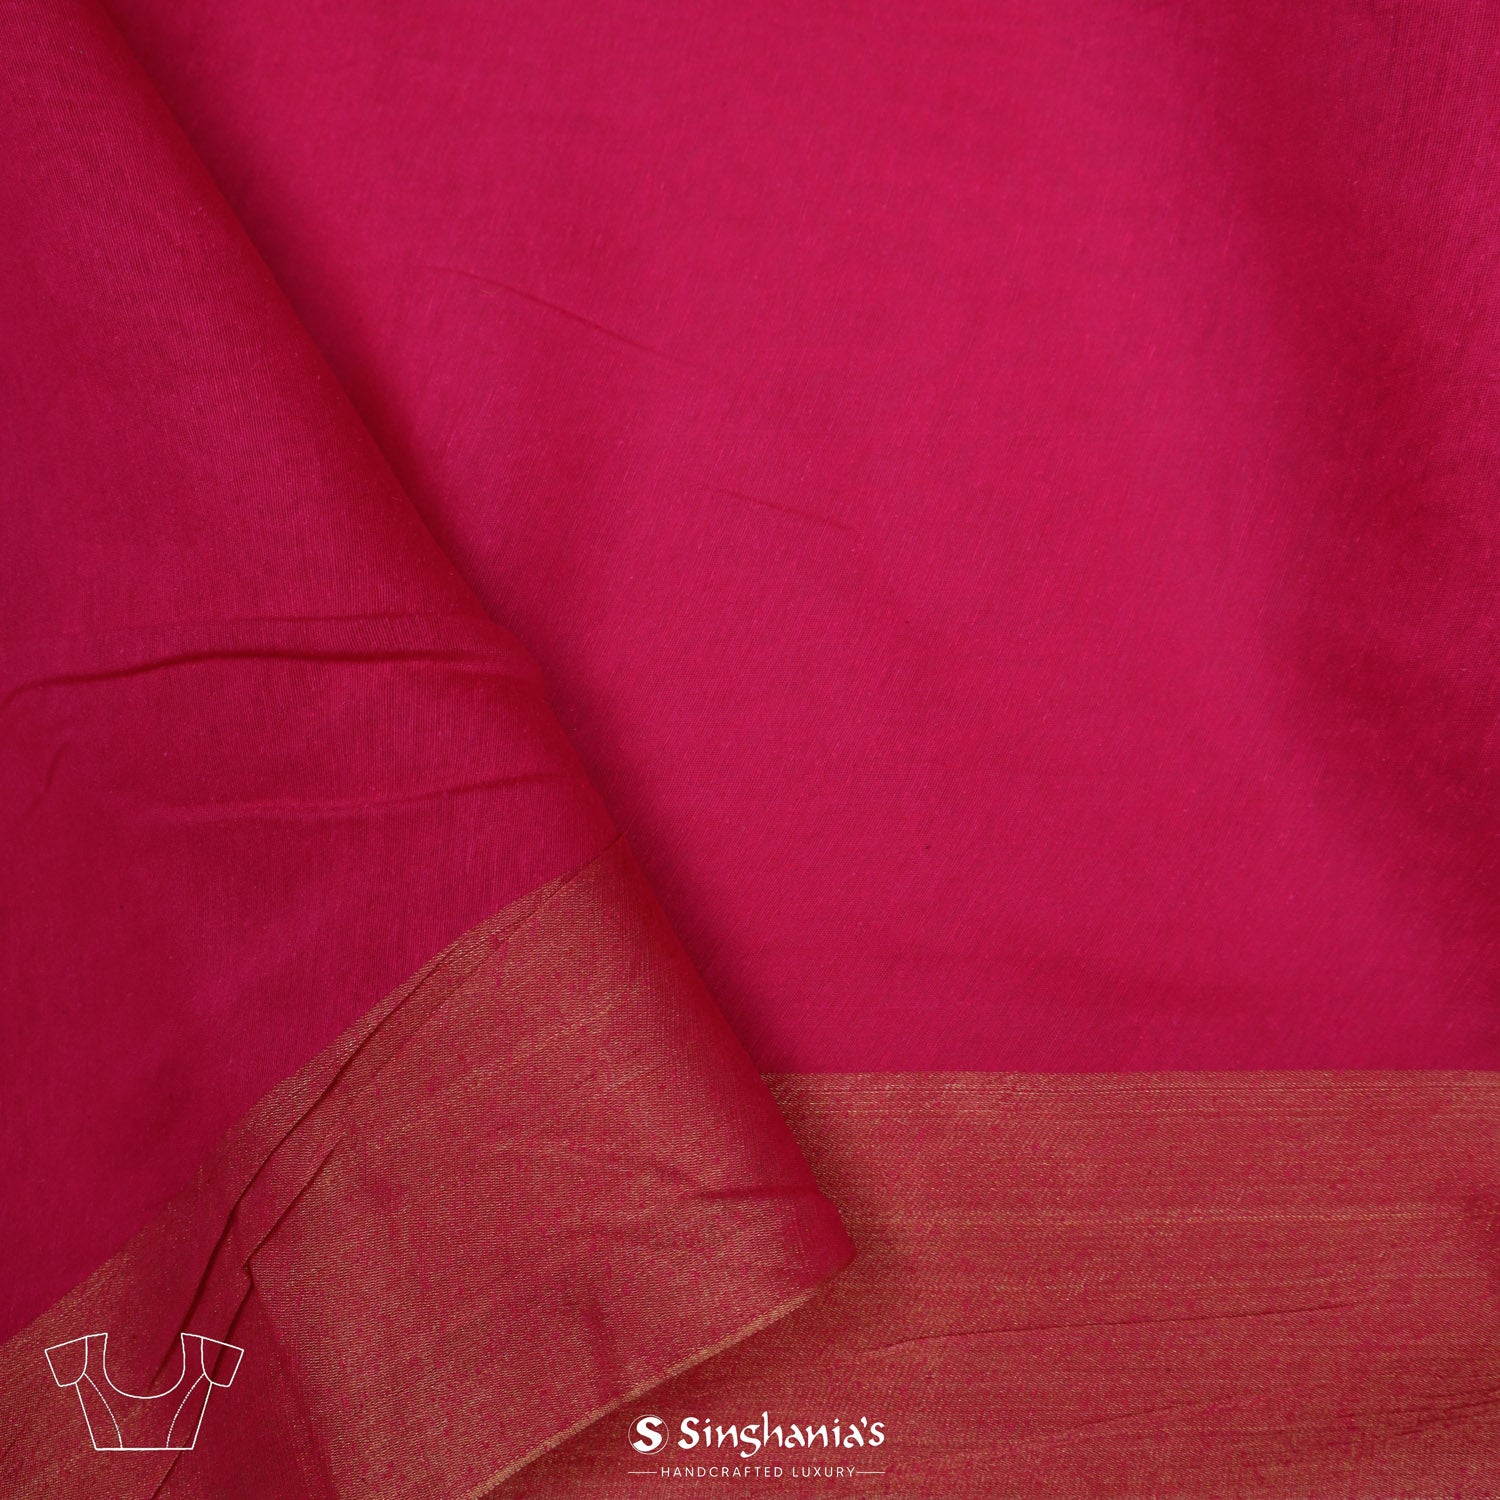 Cherry Pink Linen Saree With Mukaish Work In Floral Butti Pattern